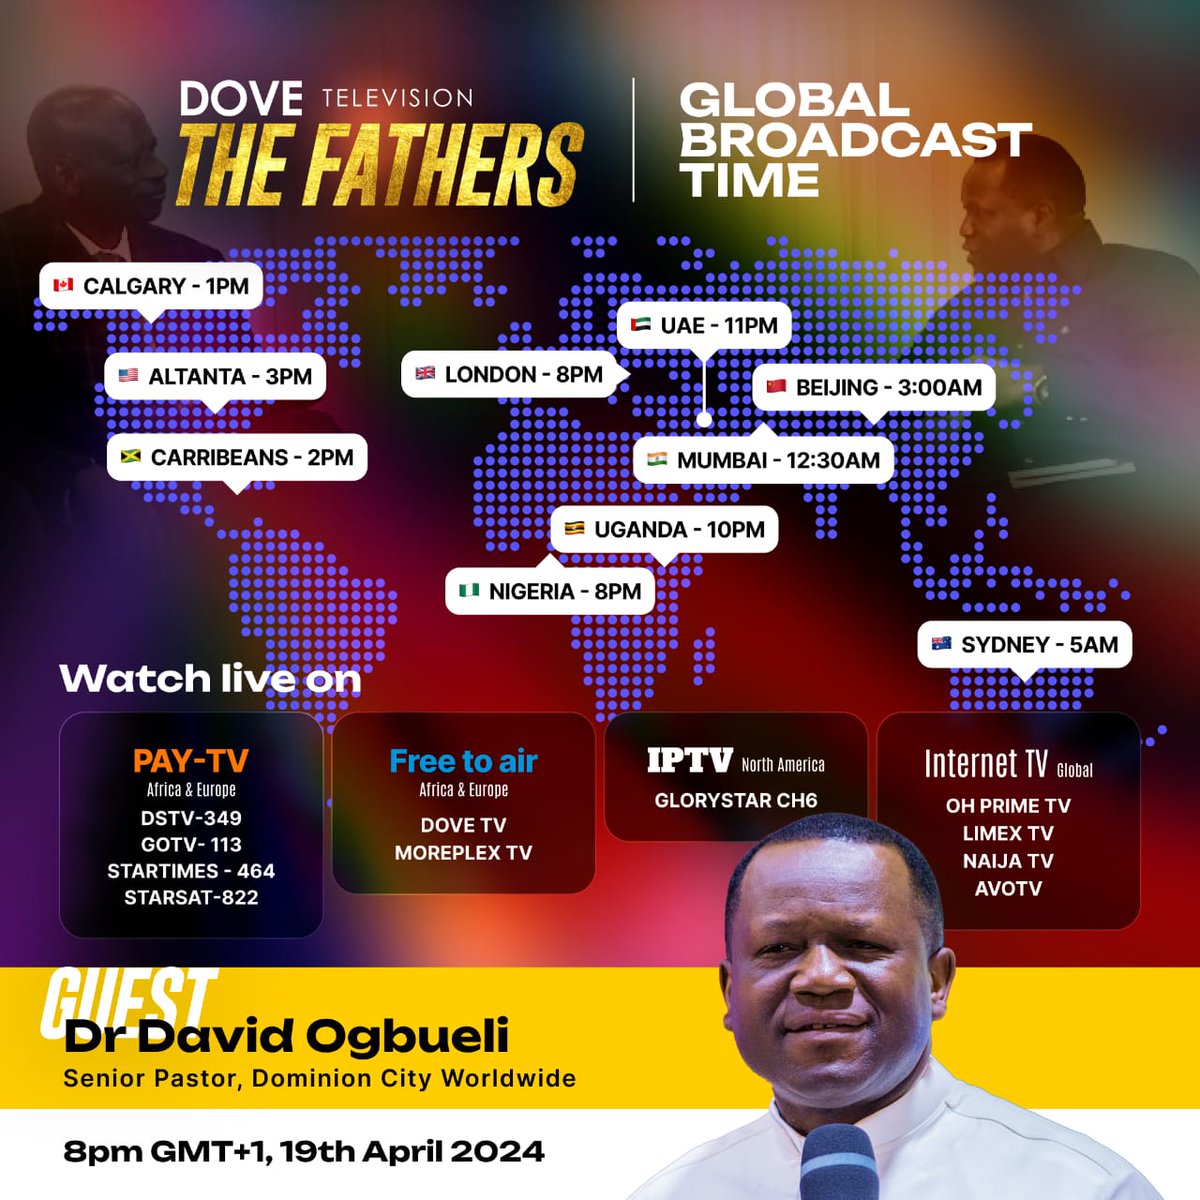 Tonight on “The Fathers series” on Dove Television network. 

Guest: Dr. David Ogbueli (Senior Pastor, Dominion City Worldwide)
Time is 8pm GMT+1

Connect on DSTV, GOTV, Startimes, AvoTV & other stations on the global broadcast list.

#dovetv #pastordavidogbueli #kingdomteachings